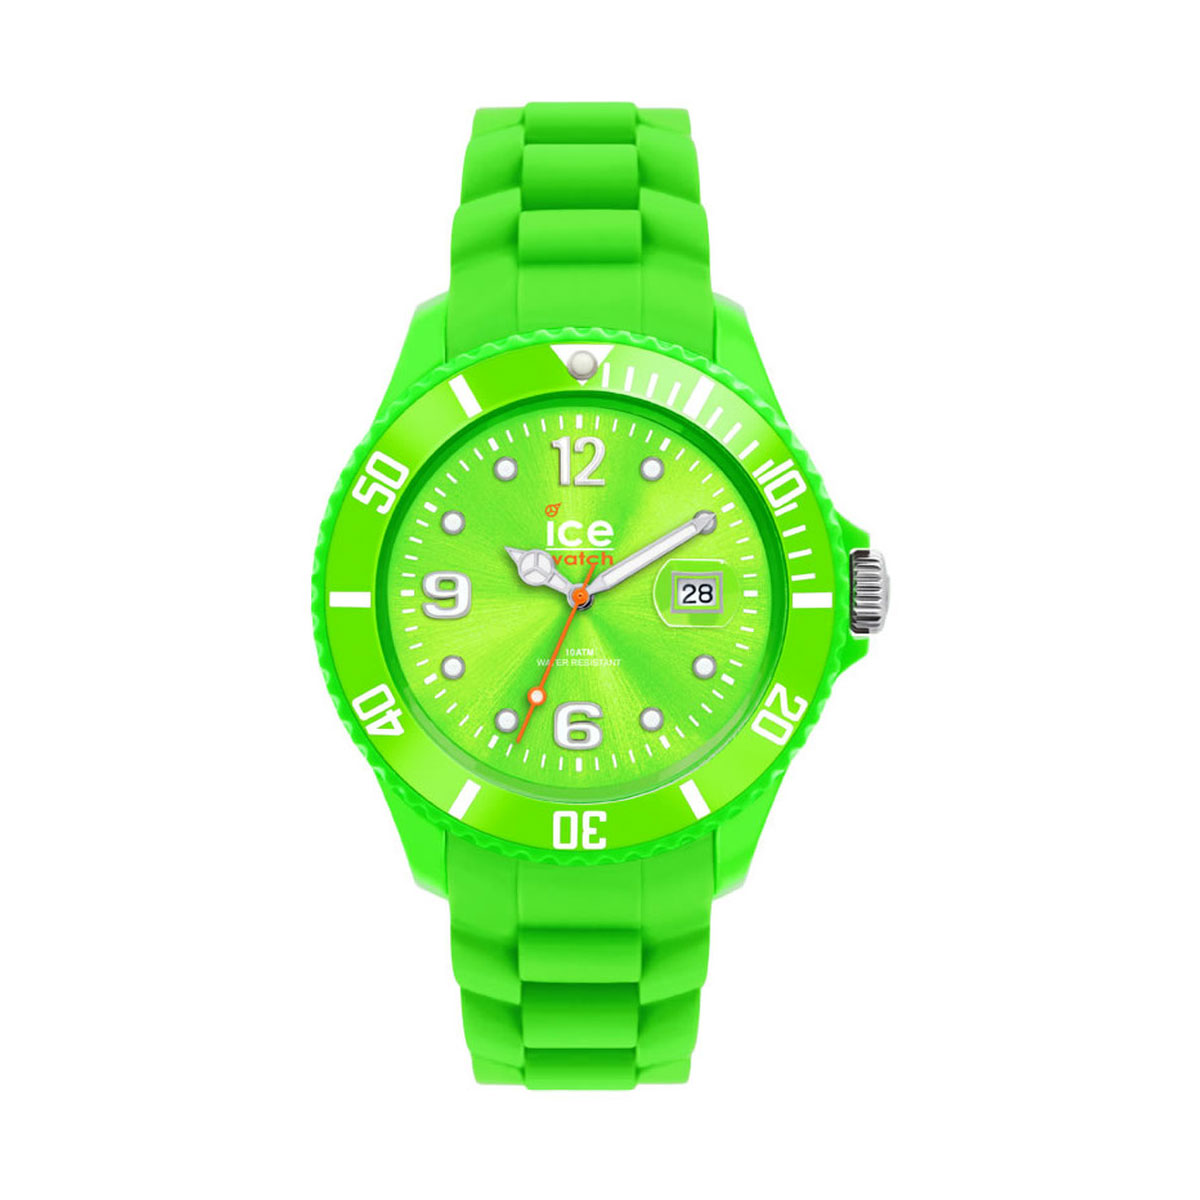 Ice Watch ICE Forever Mens Model 000146 Watch